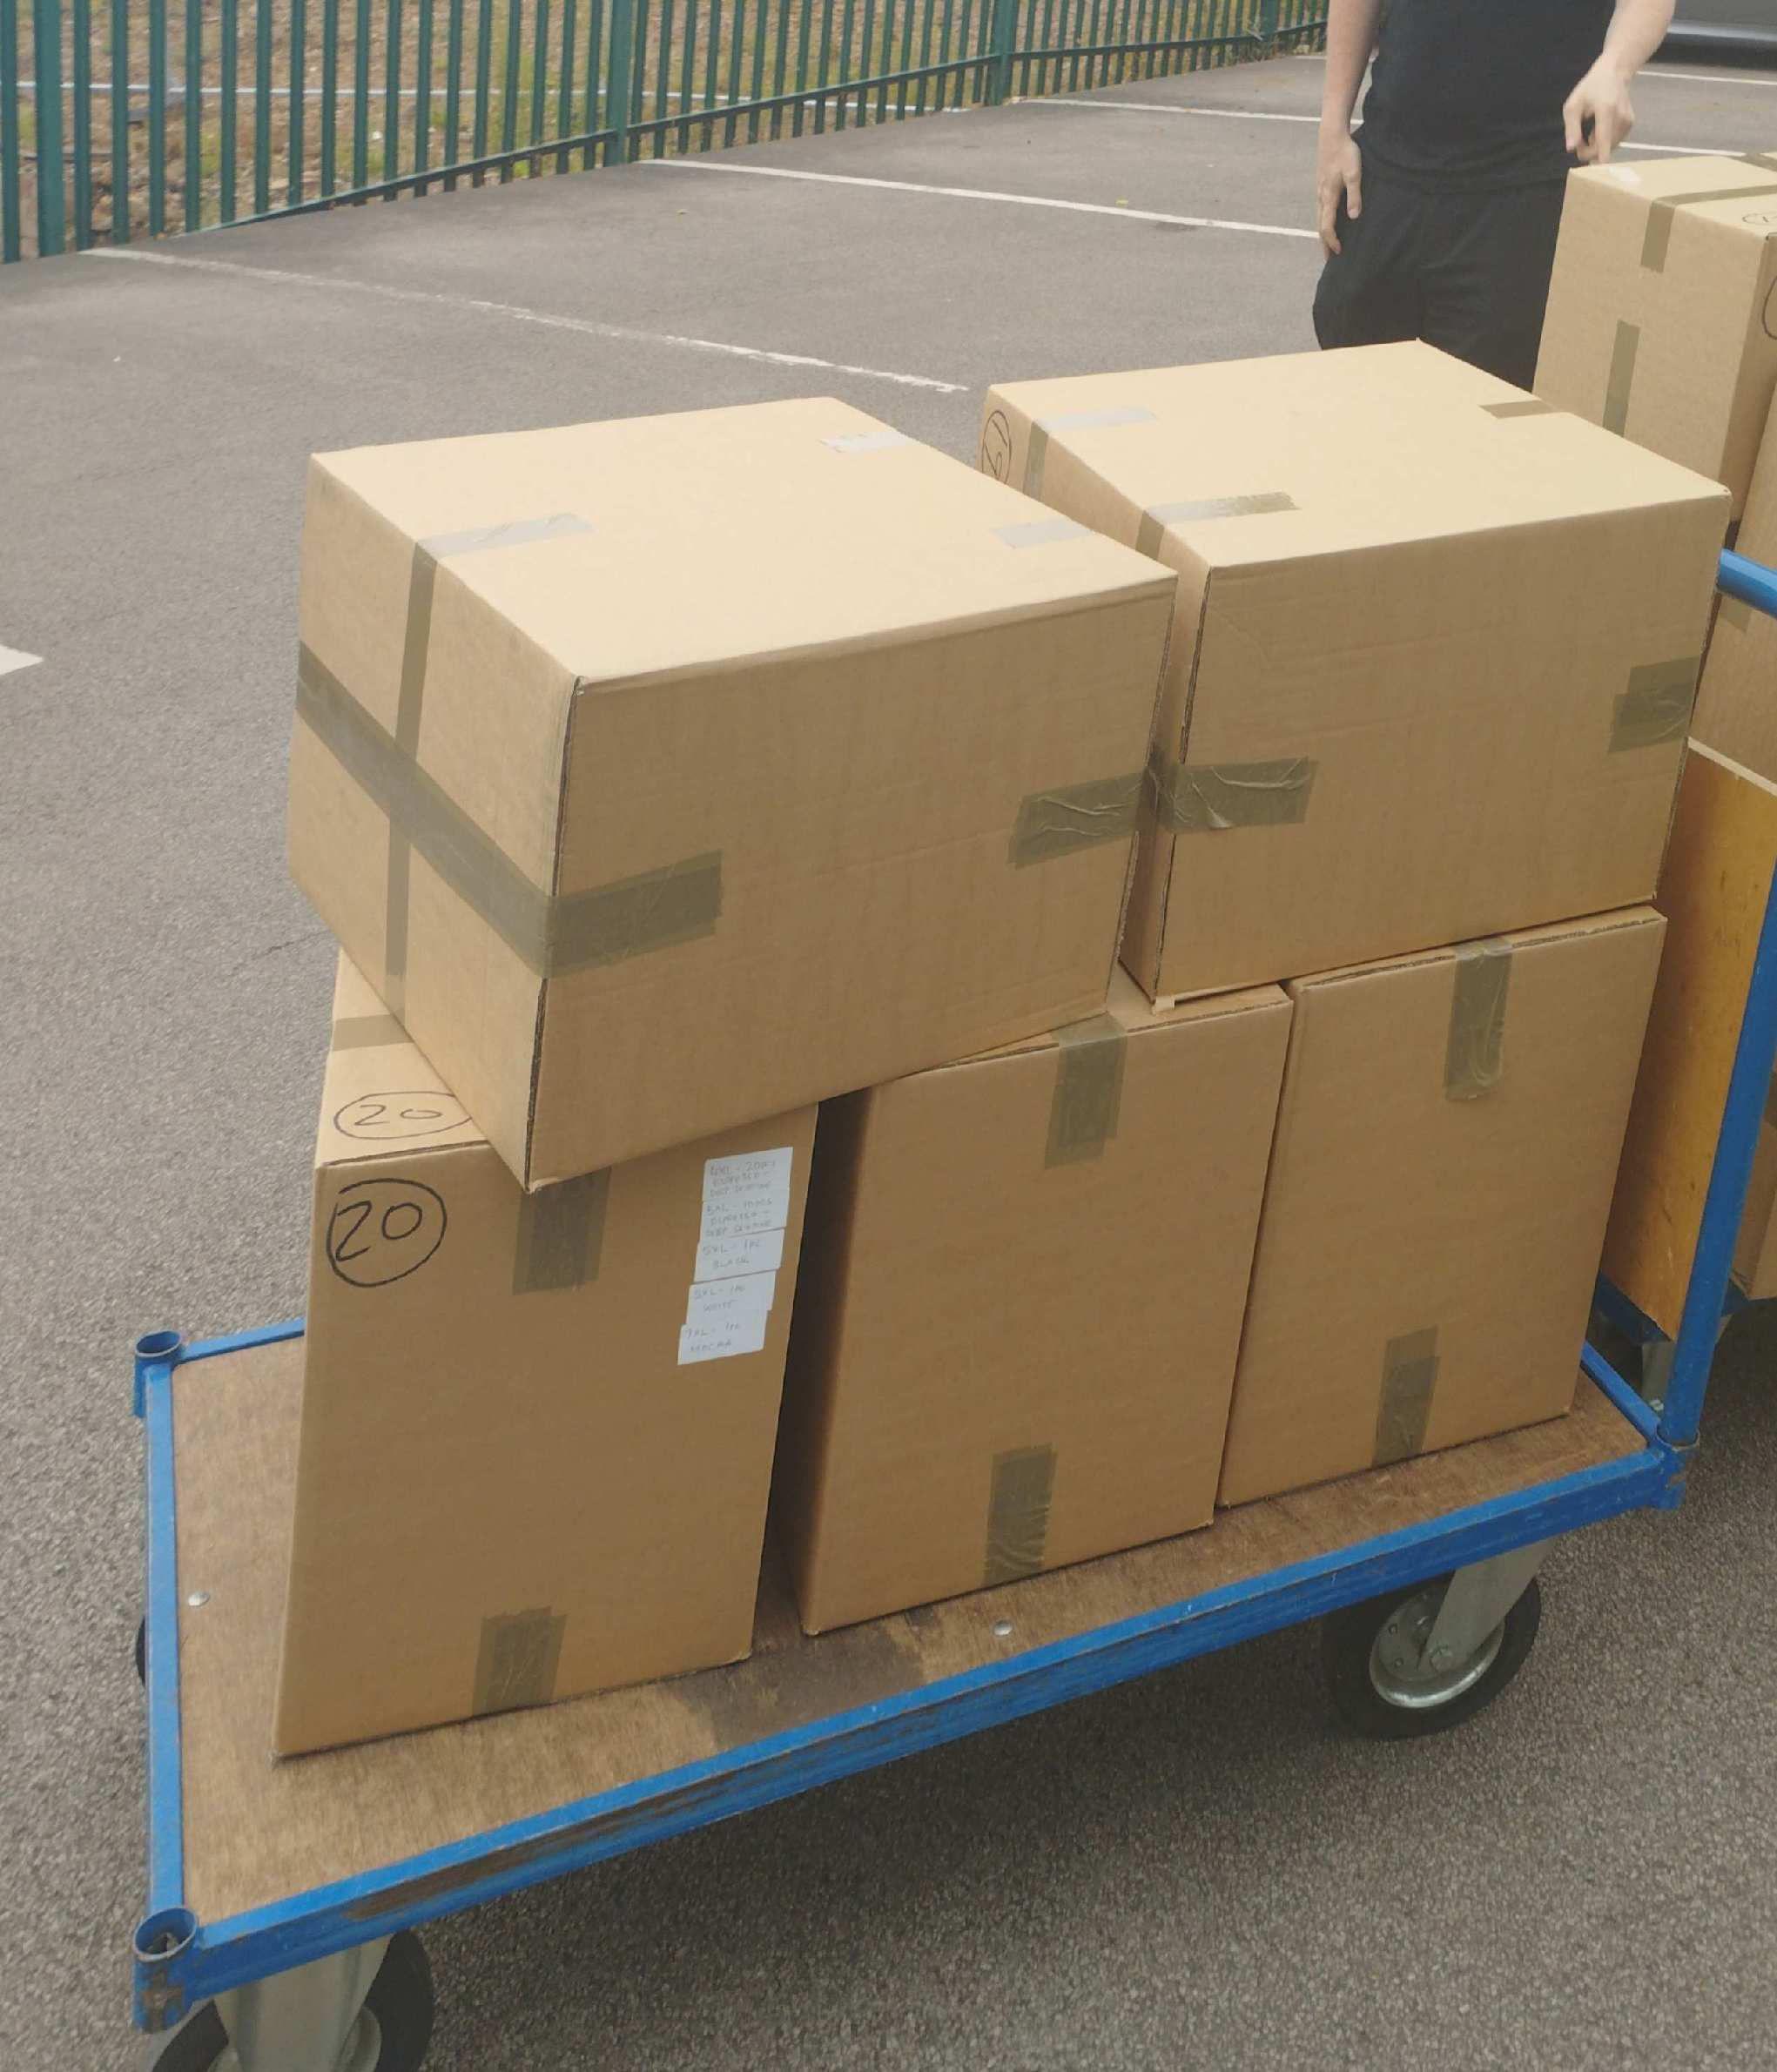 express couriers parcels on delivery trolley